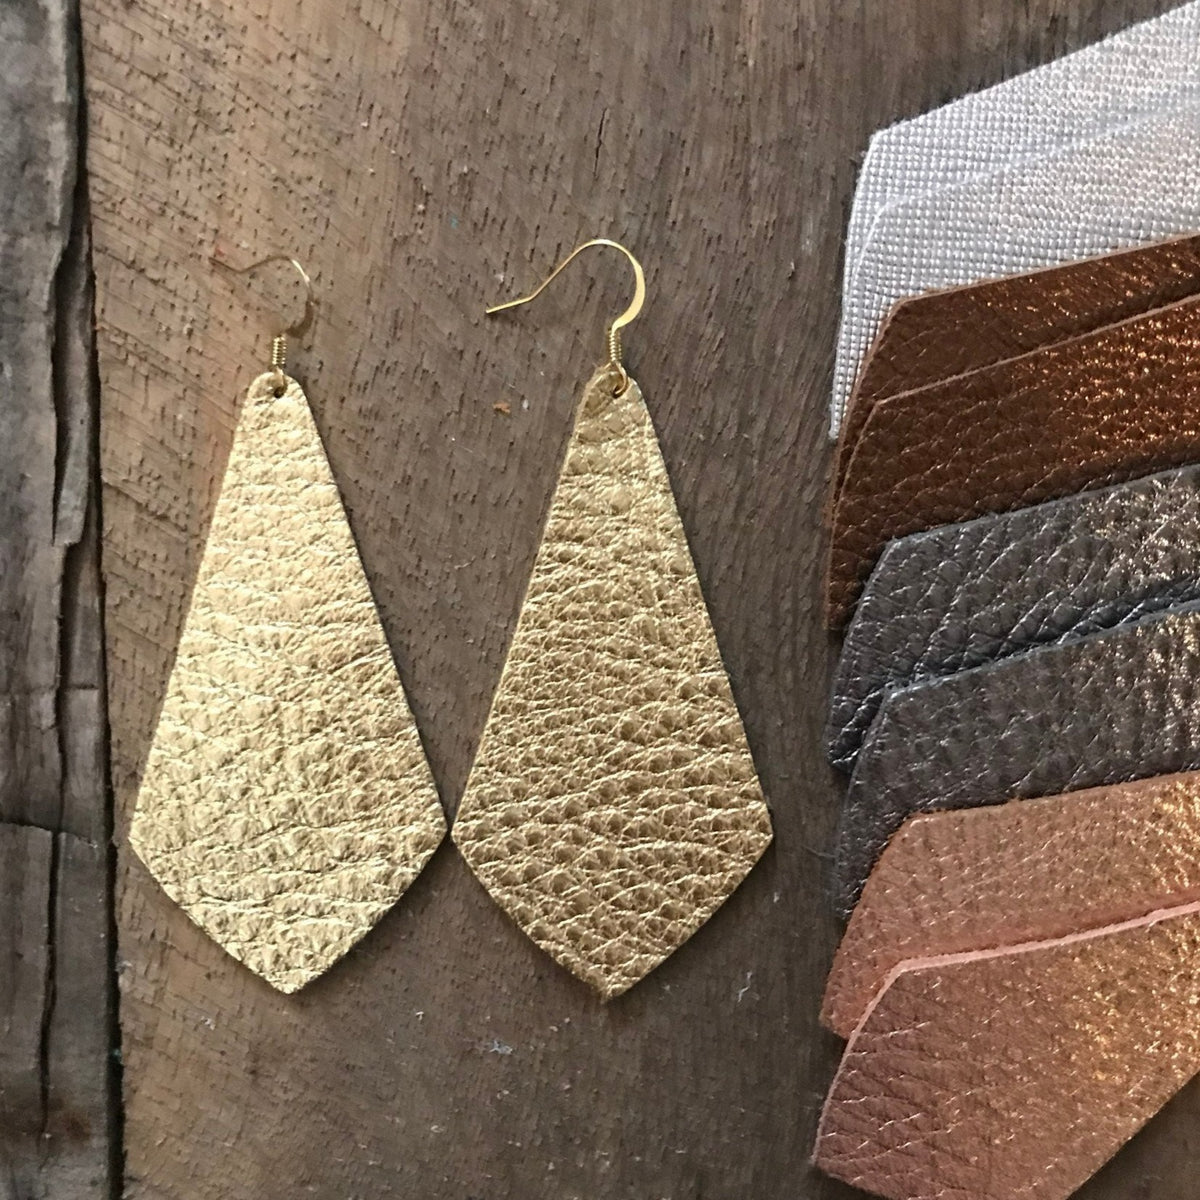 How To Make Faux Leather Earrings with Crystals on a Cricut  Leather  jewelry making, Diy leather earrings, Leather jewelry diy